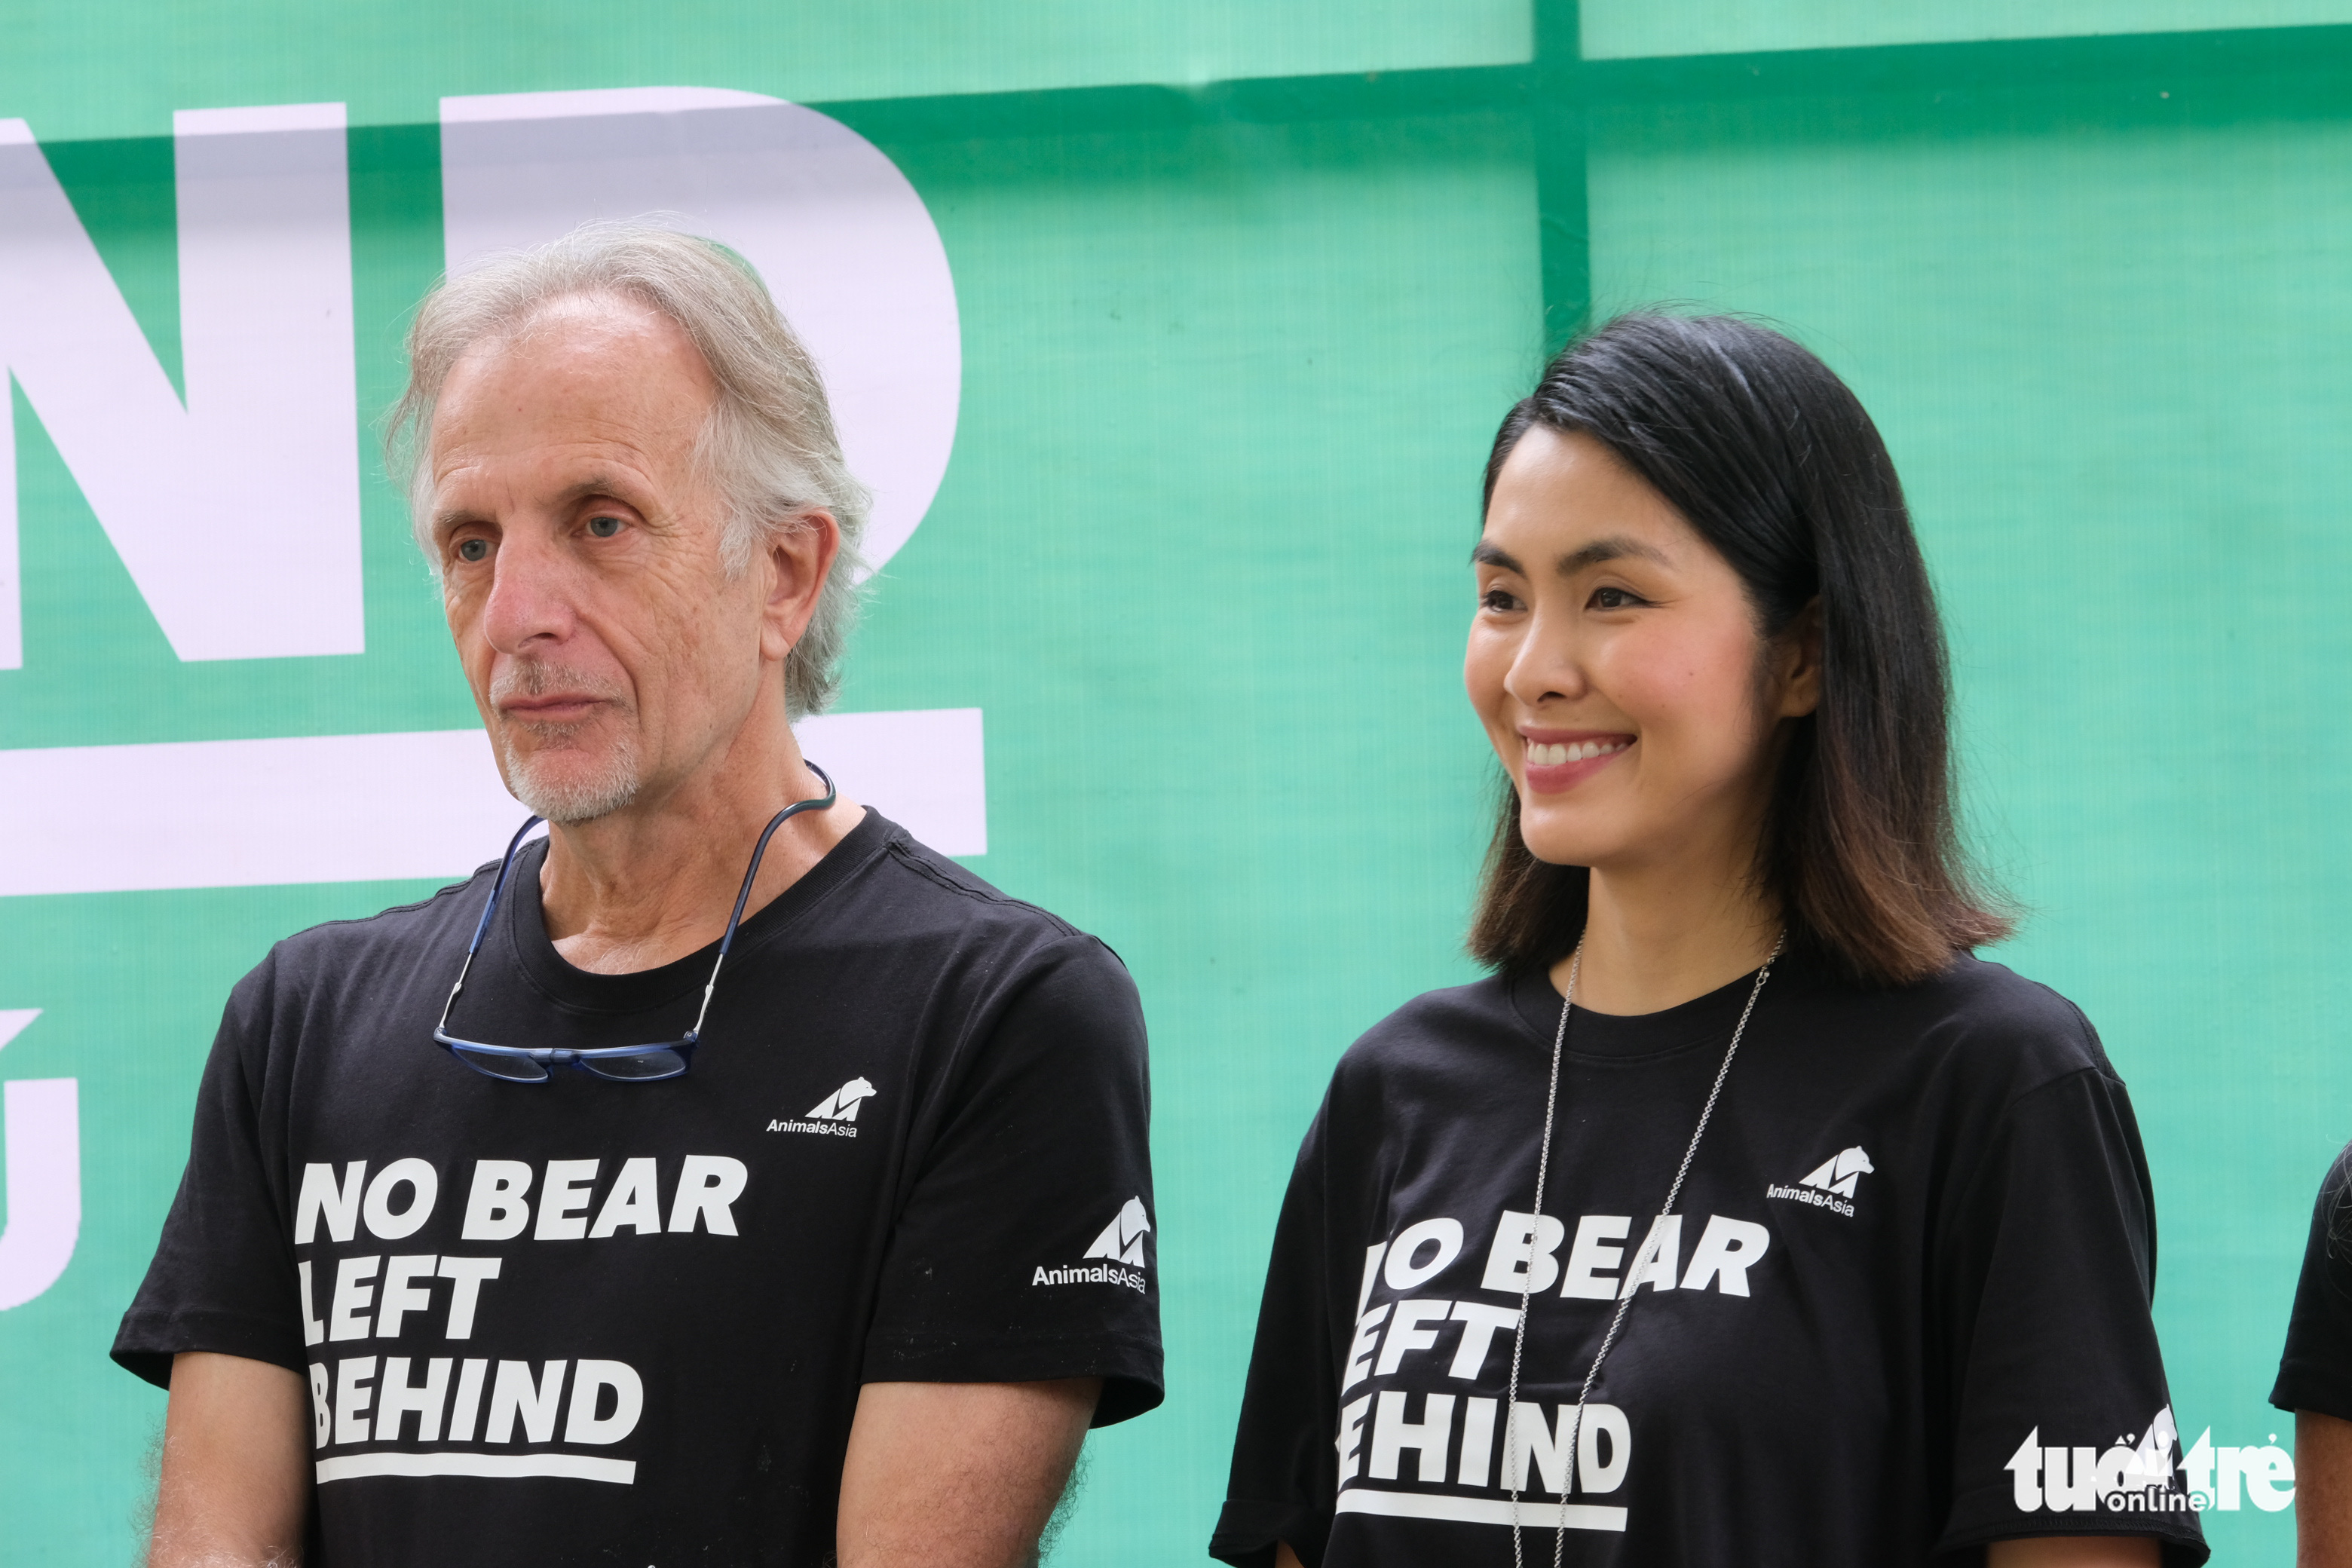 Australian writer Jan Sardi (L) and Vietnamese actress Tang Thanh Ha attend the launch event for the #NoBearLeftBehind campaign at Vietnam Bear Rescue Center in northern Vinh Phuc Province, Vietnam, May 25, 2022. Photo: Ha Thanh / Tuoi Tre